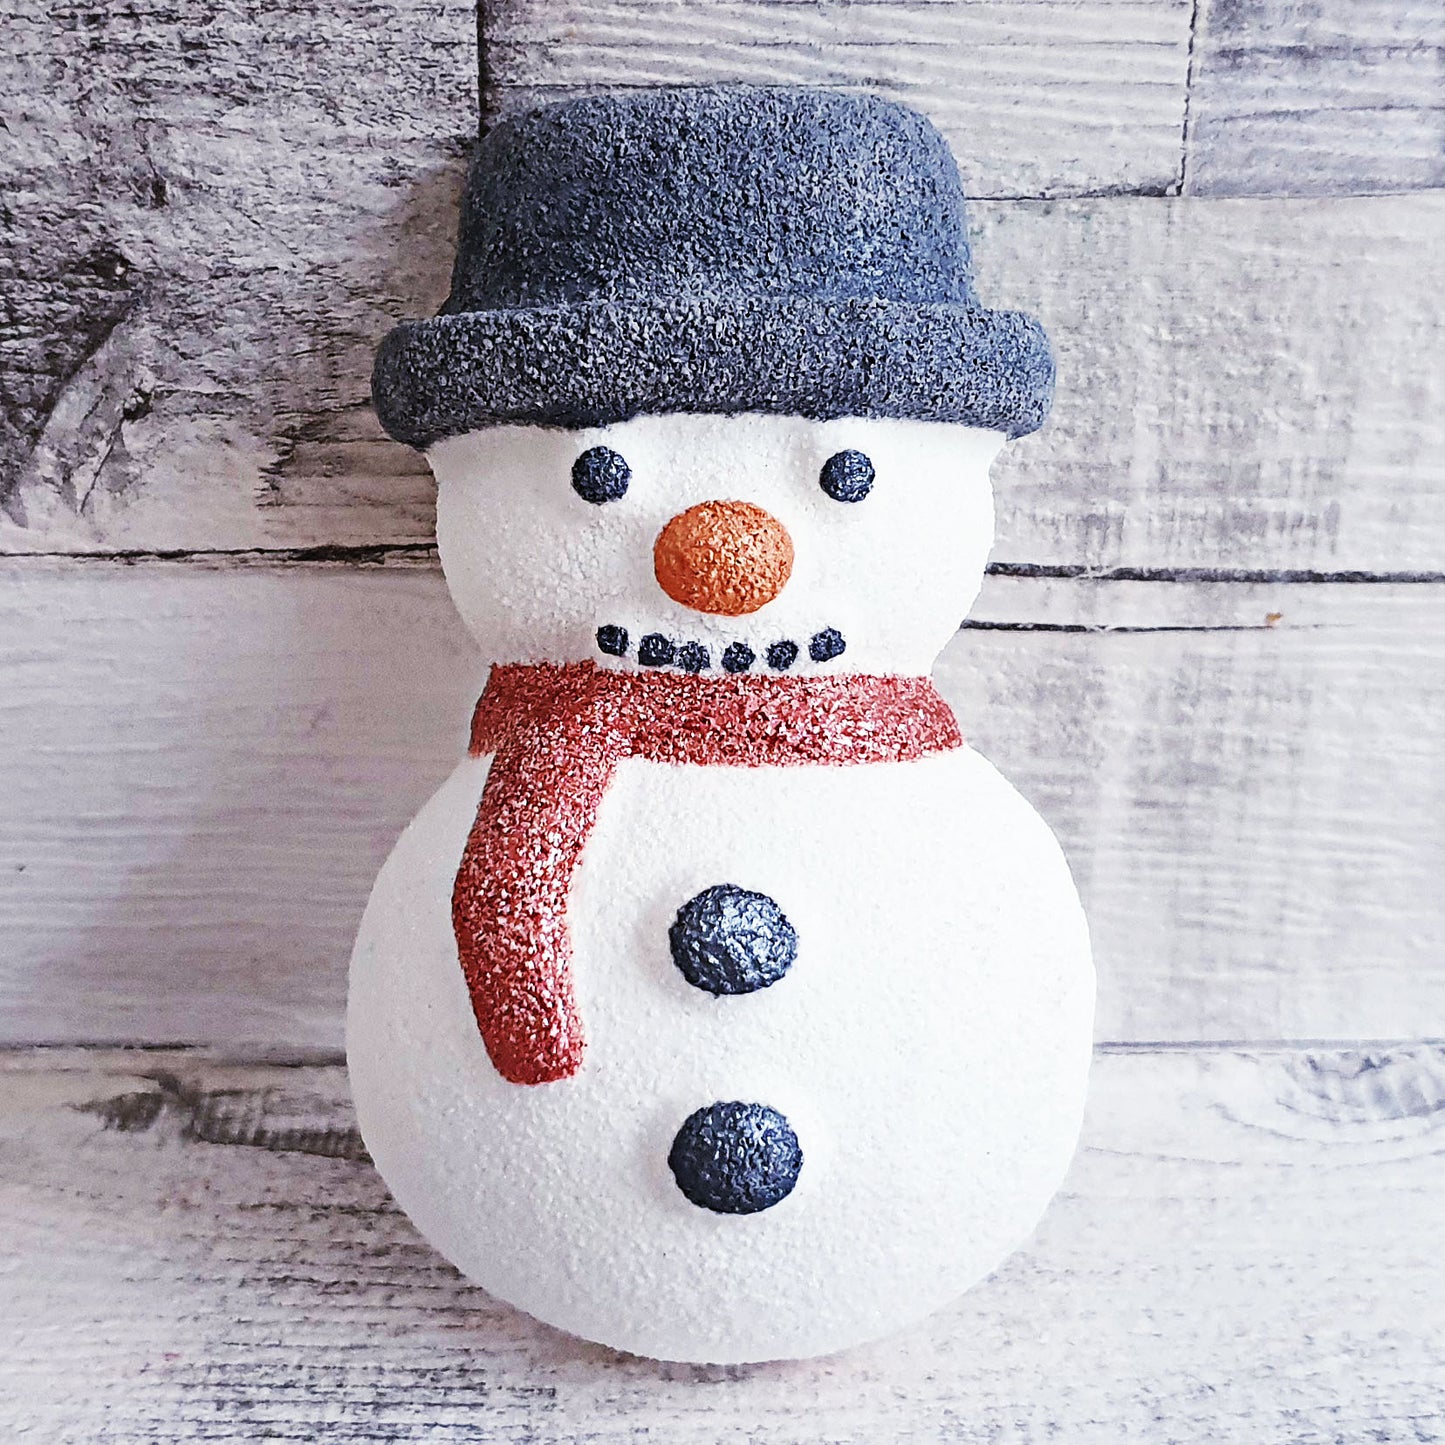 Snowman Mould | Truly Personal | Bath Bomb, Soap, Resin, Chocolate, Jelly, Wax Melts Mold